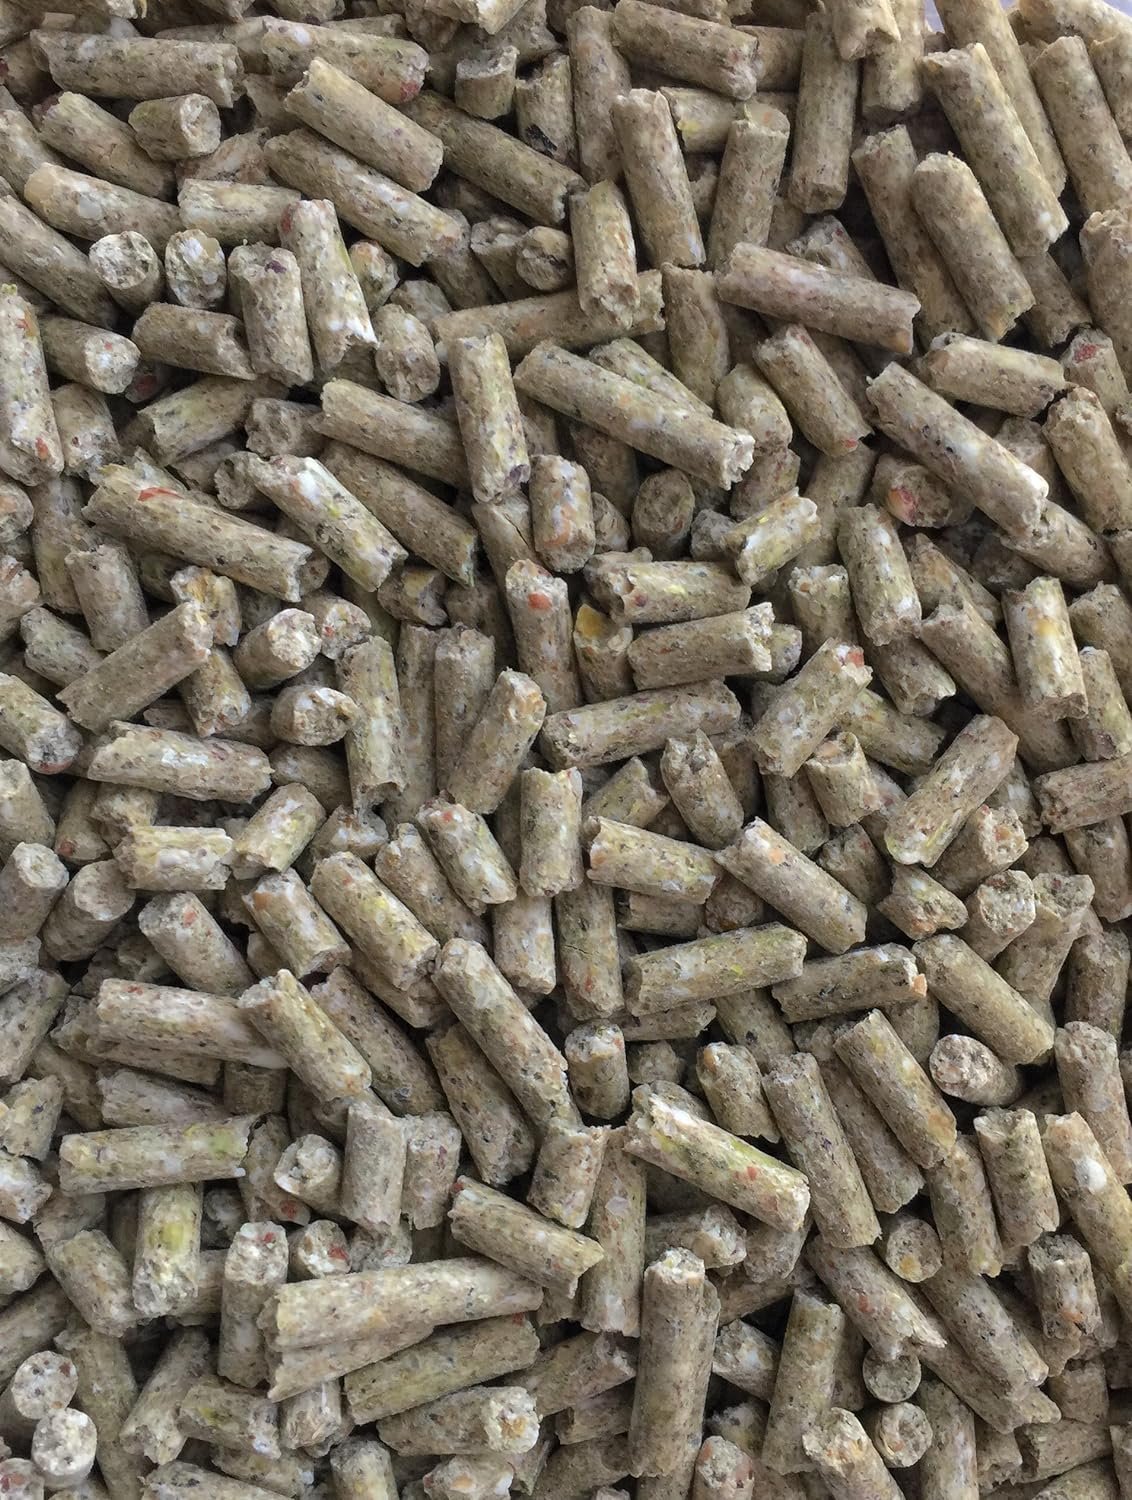 dnihos Modesto Milling Organic, Non-GMO Layer Pellets for Chickens, Formulated Without Corn or Soy, 25lbs; Item# 943